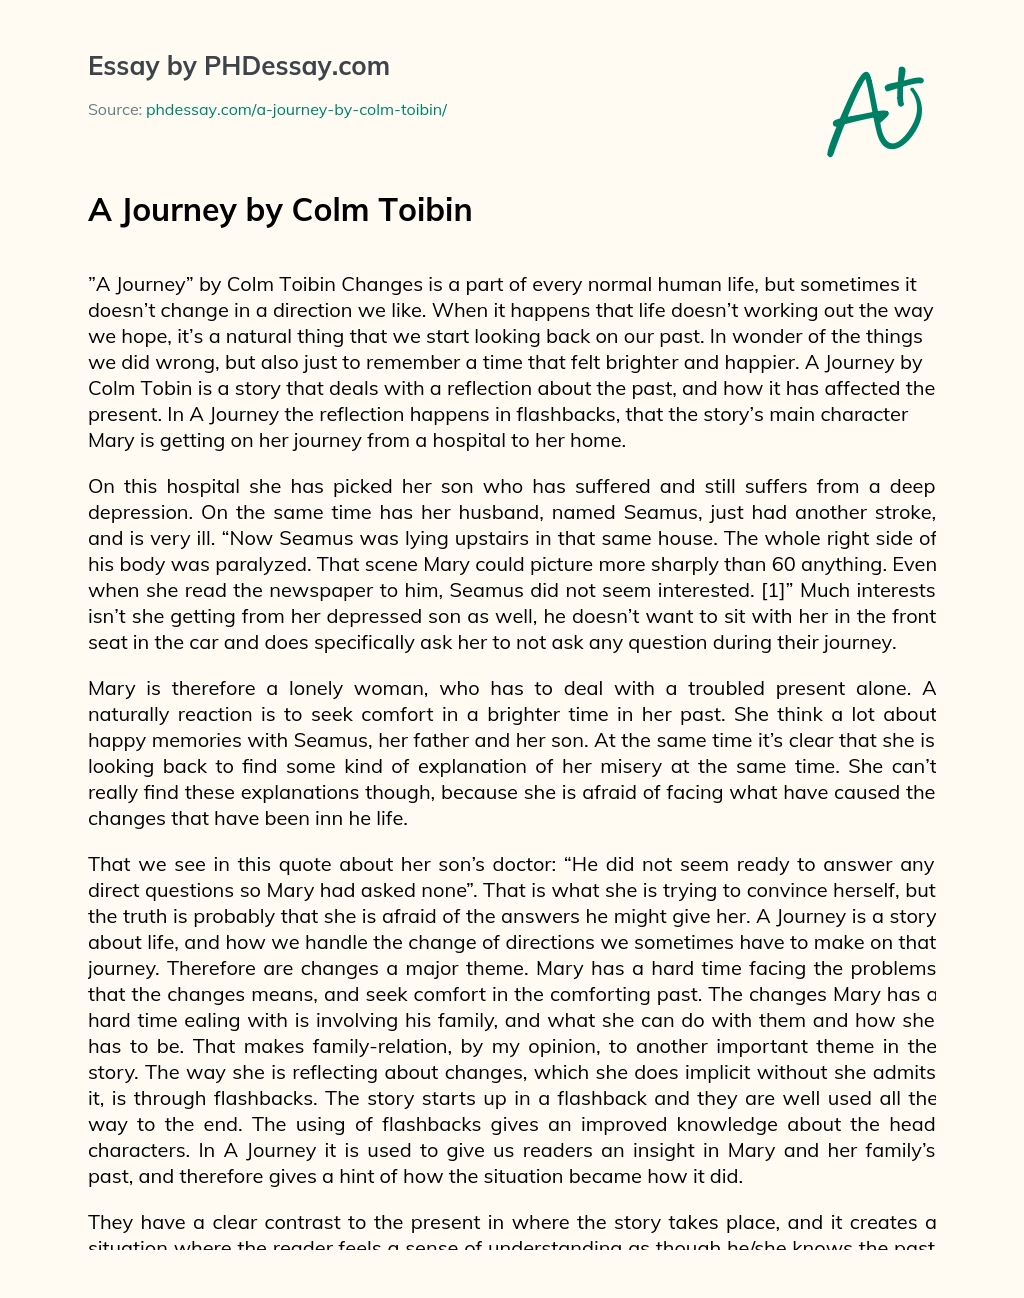 A Journey by Colm Toibin essay